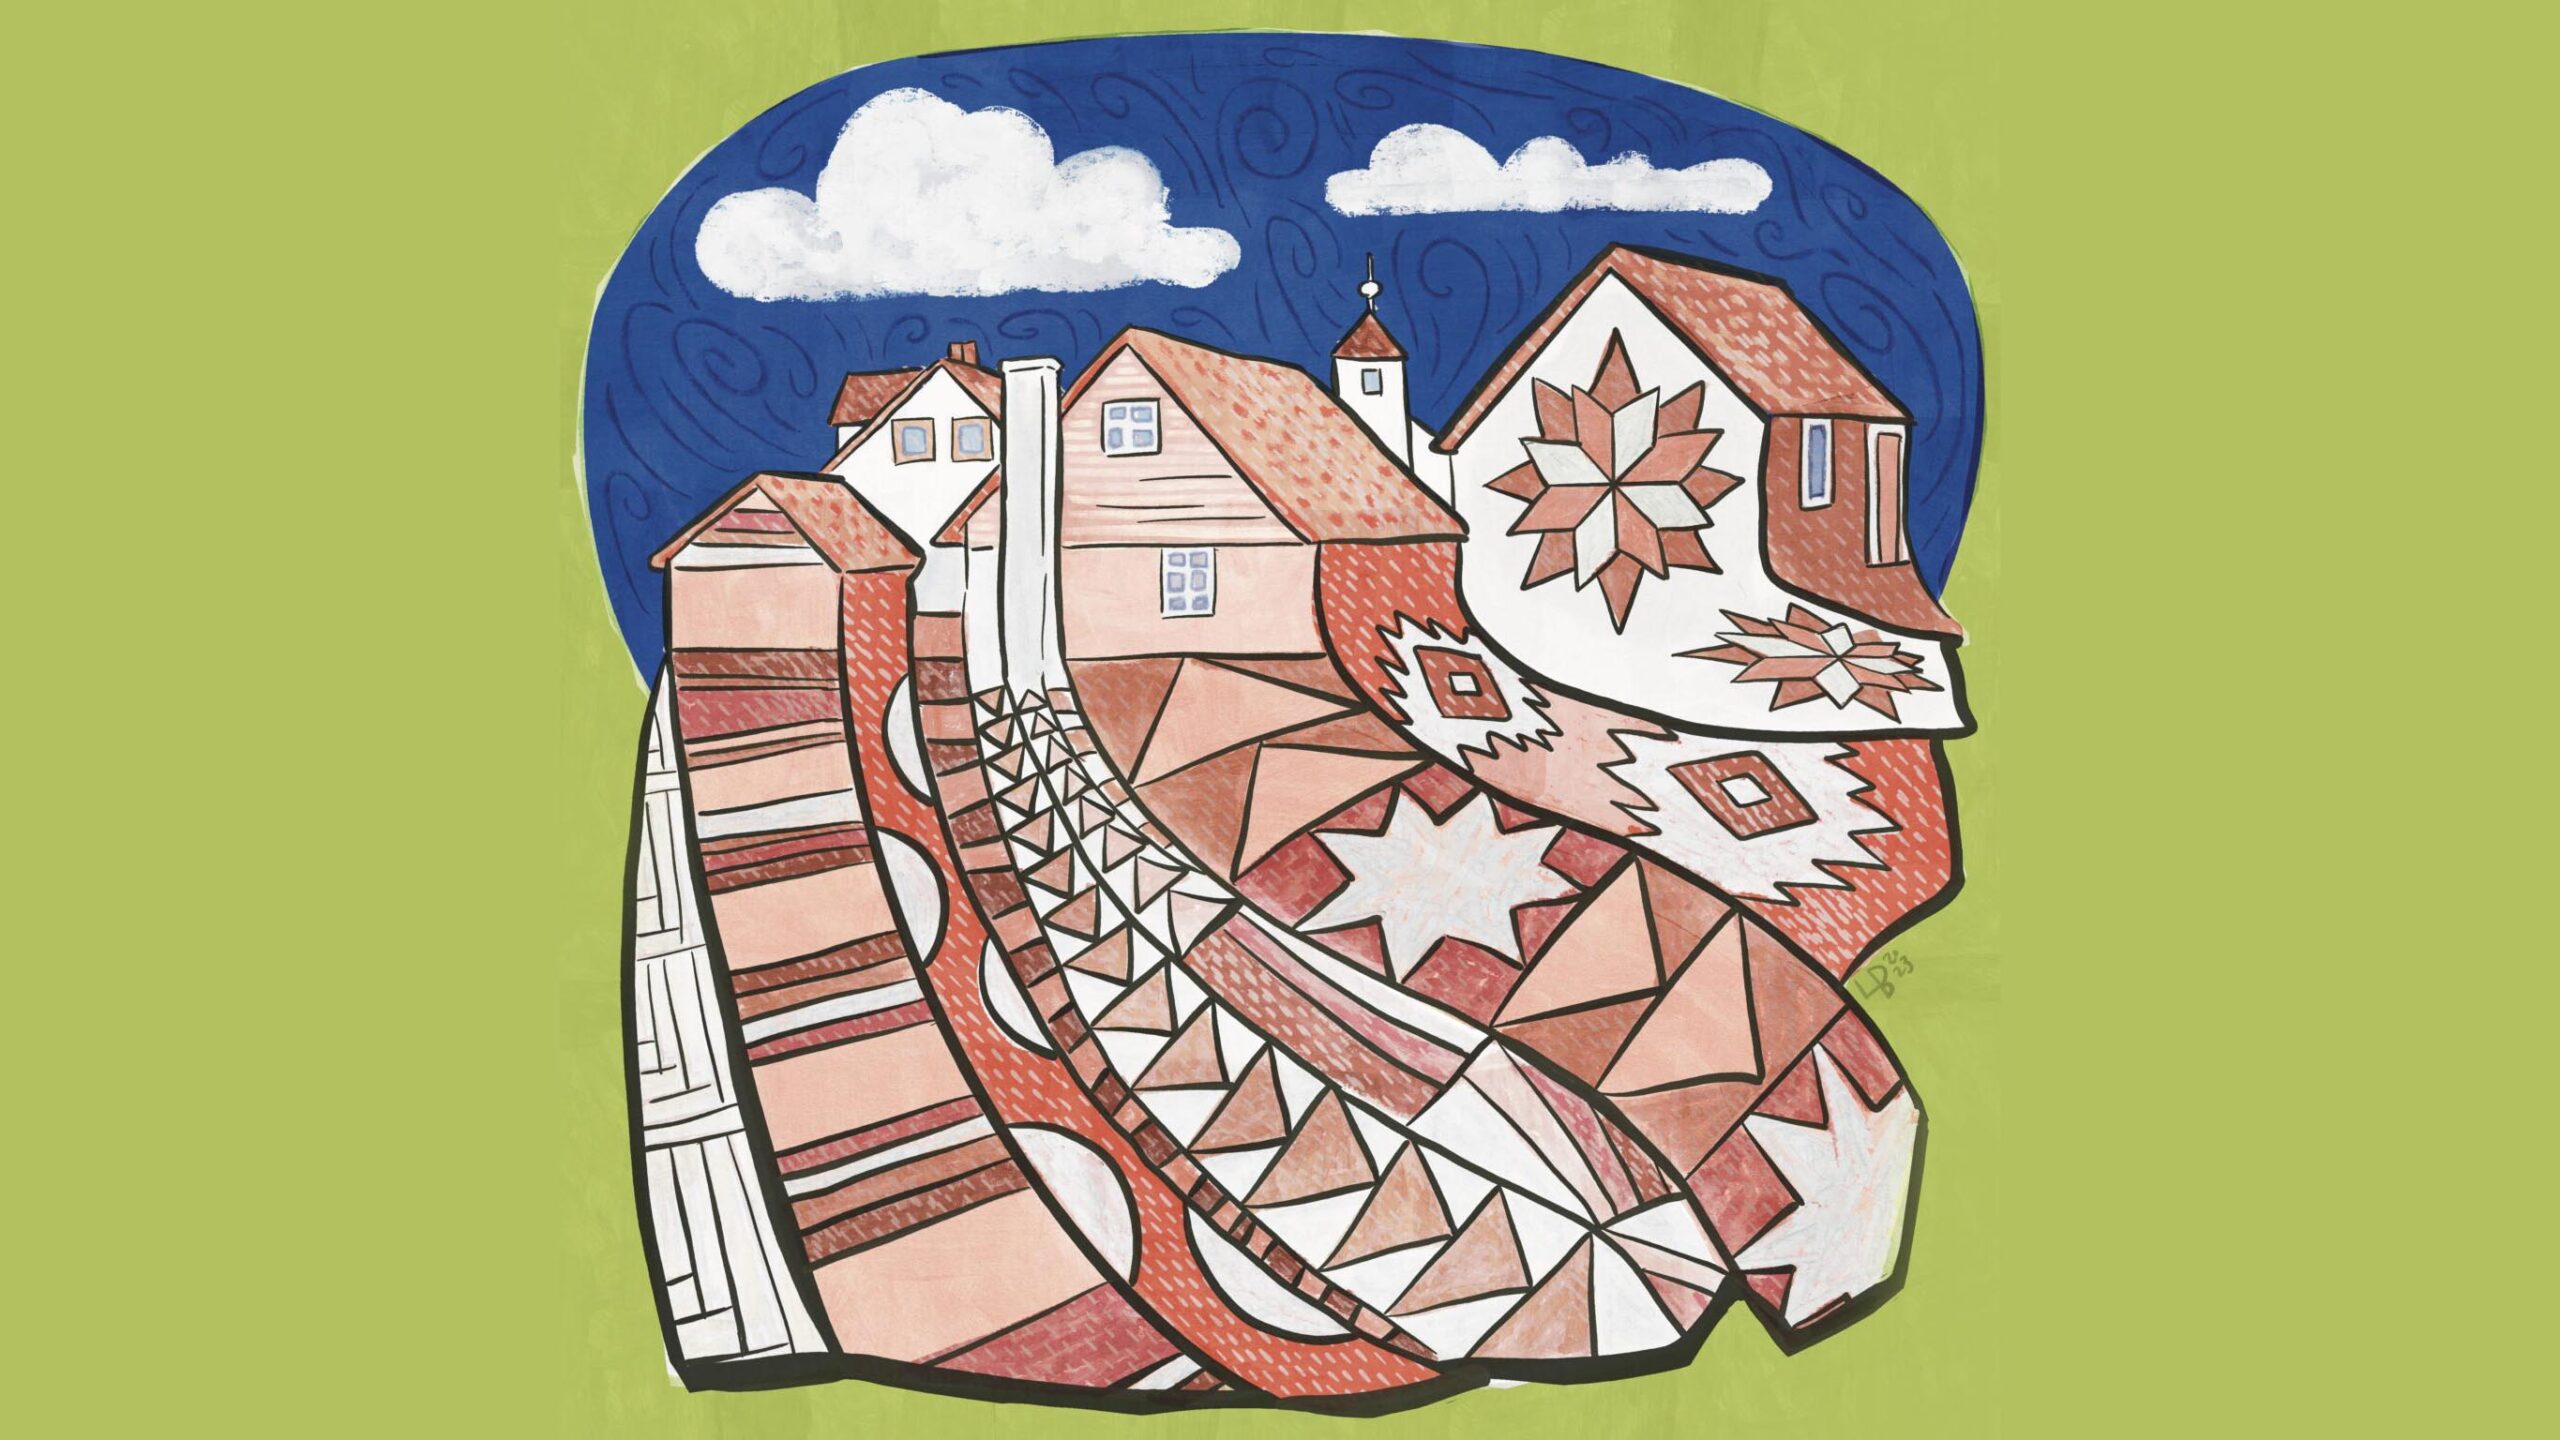 An illustration of a patchwork town with buildings that turn into undulating patterns